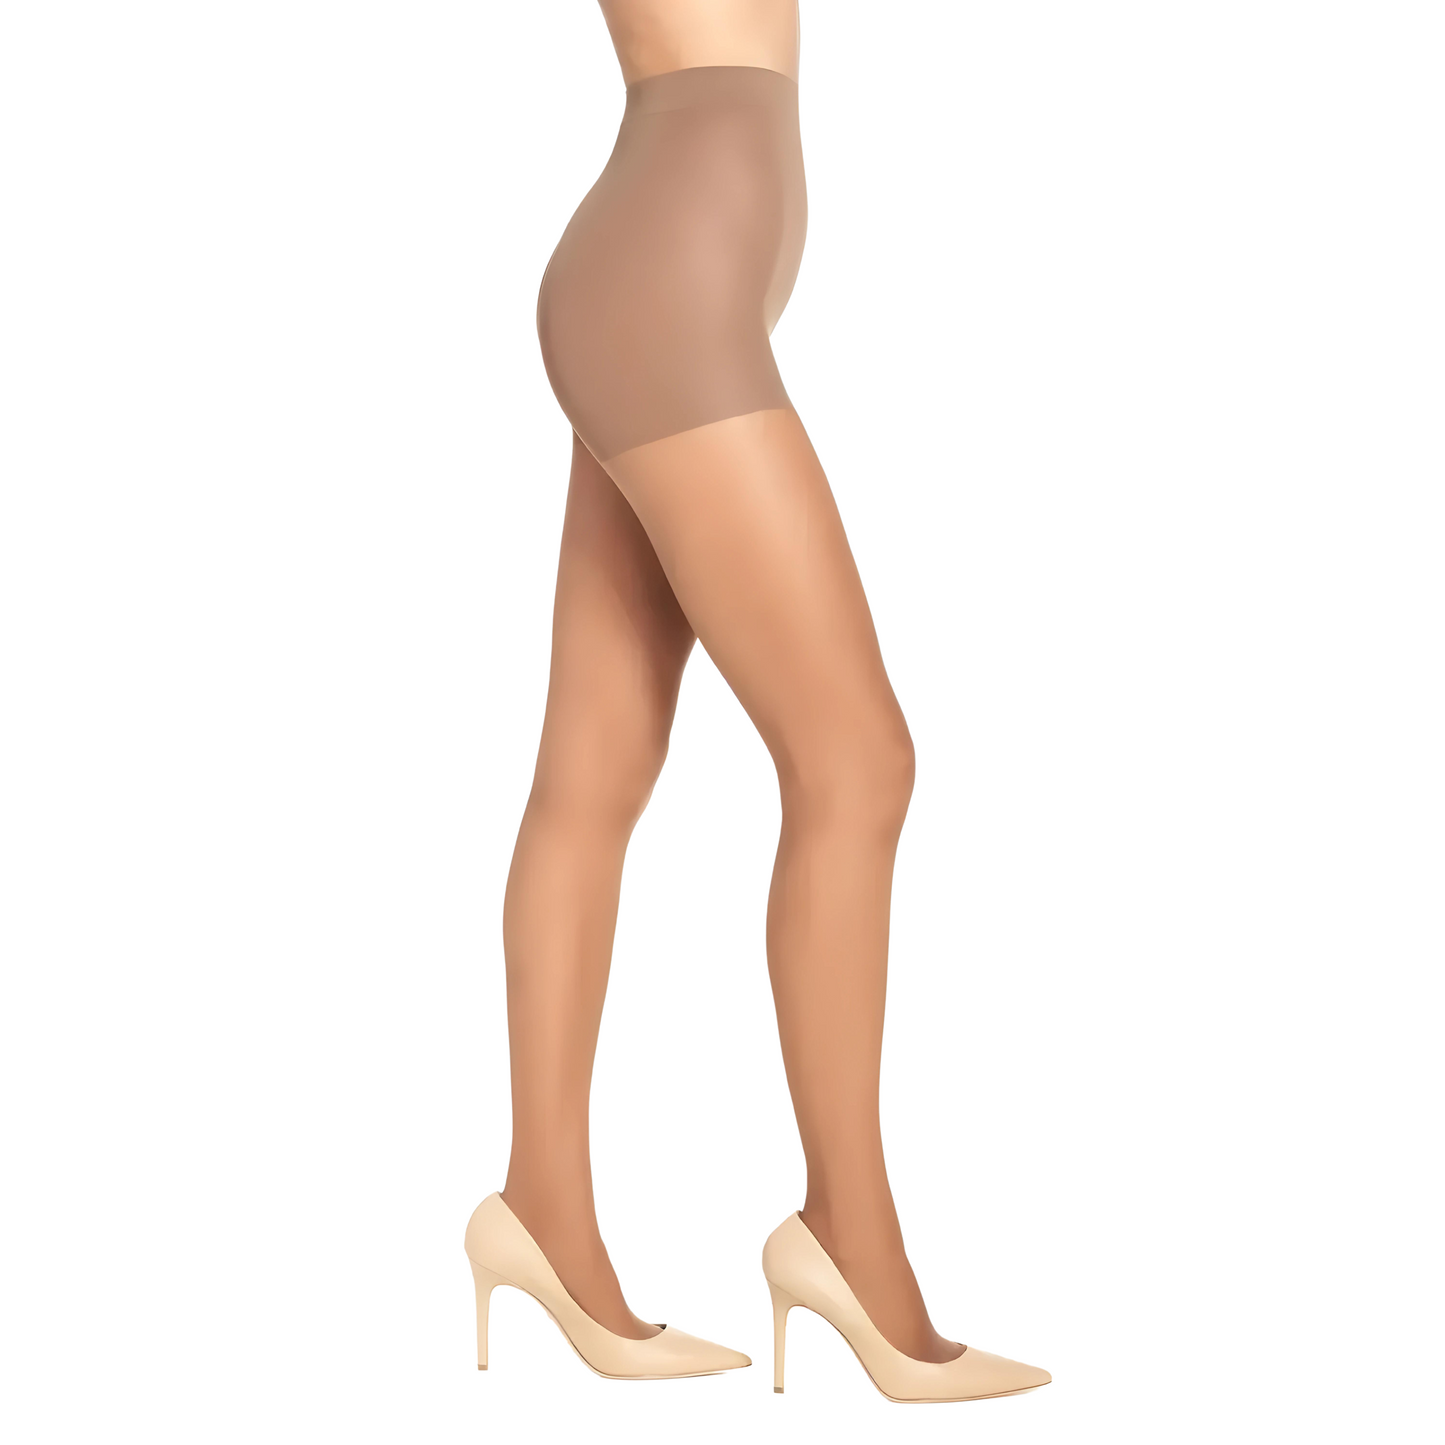 Nordstrom Everyday Control Top Sheer Pantyhose, nylons